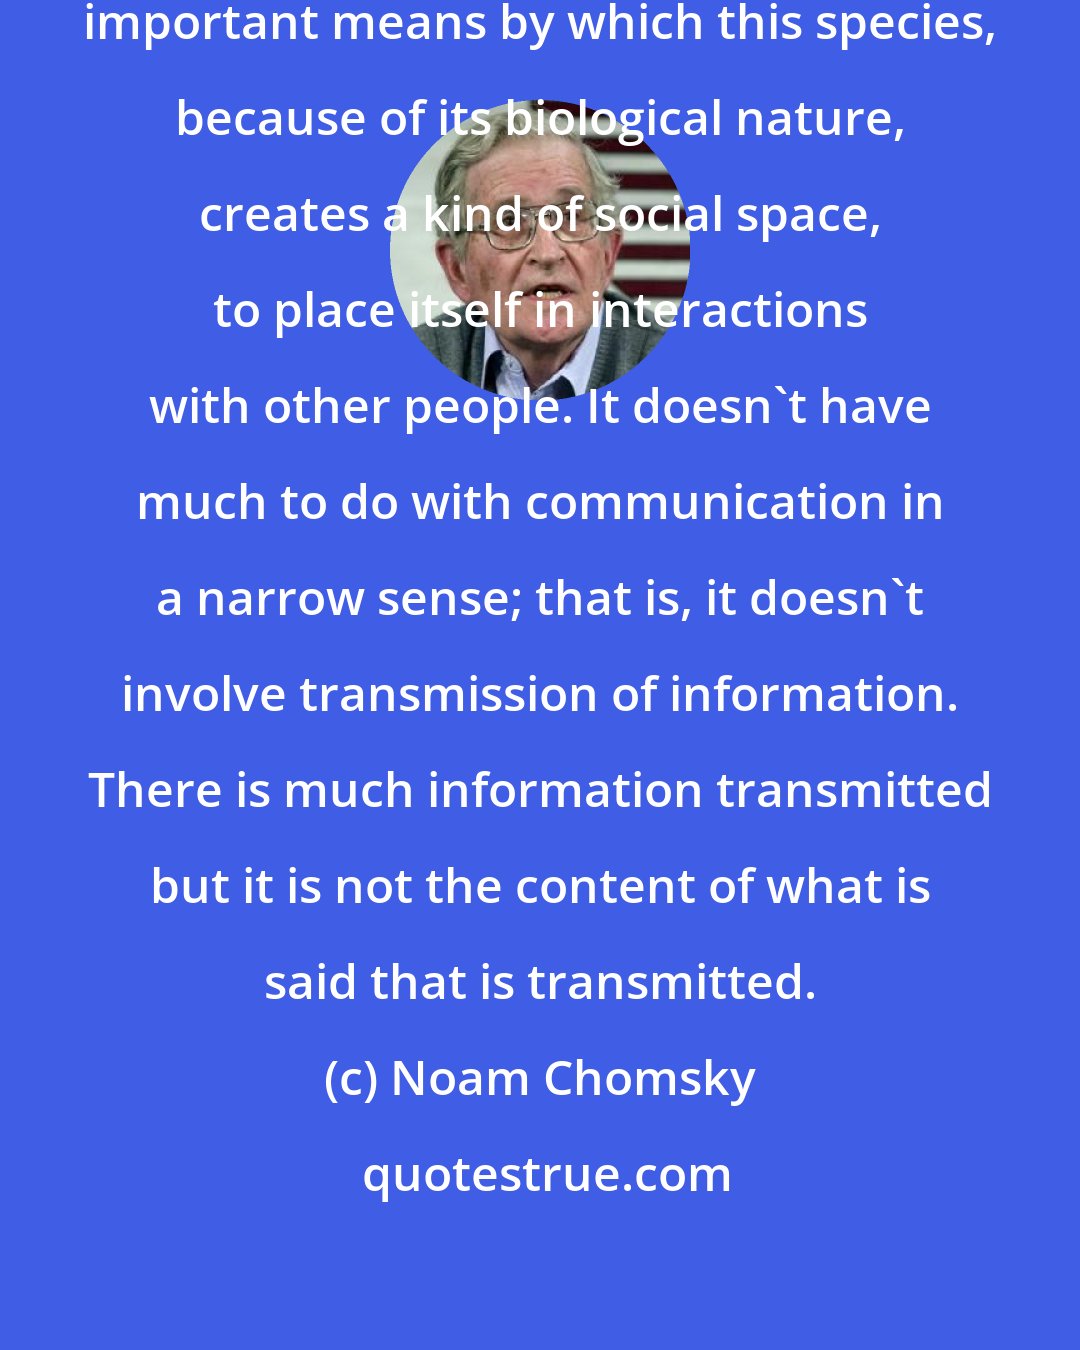 Noam Chomsky: I think the use of language is a very important means by which this species, because of its biological nature, creates a kind of social space, to place itself in interactions with other people. It doesn't have much to do with communication in a narrow sense; that is, it doesn't involve transmission of information. There is much information transmitted but it is not the content of what is said that is transmitted.